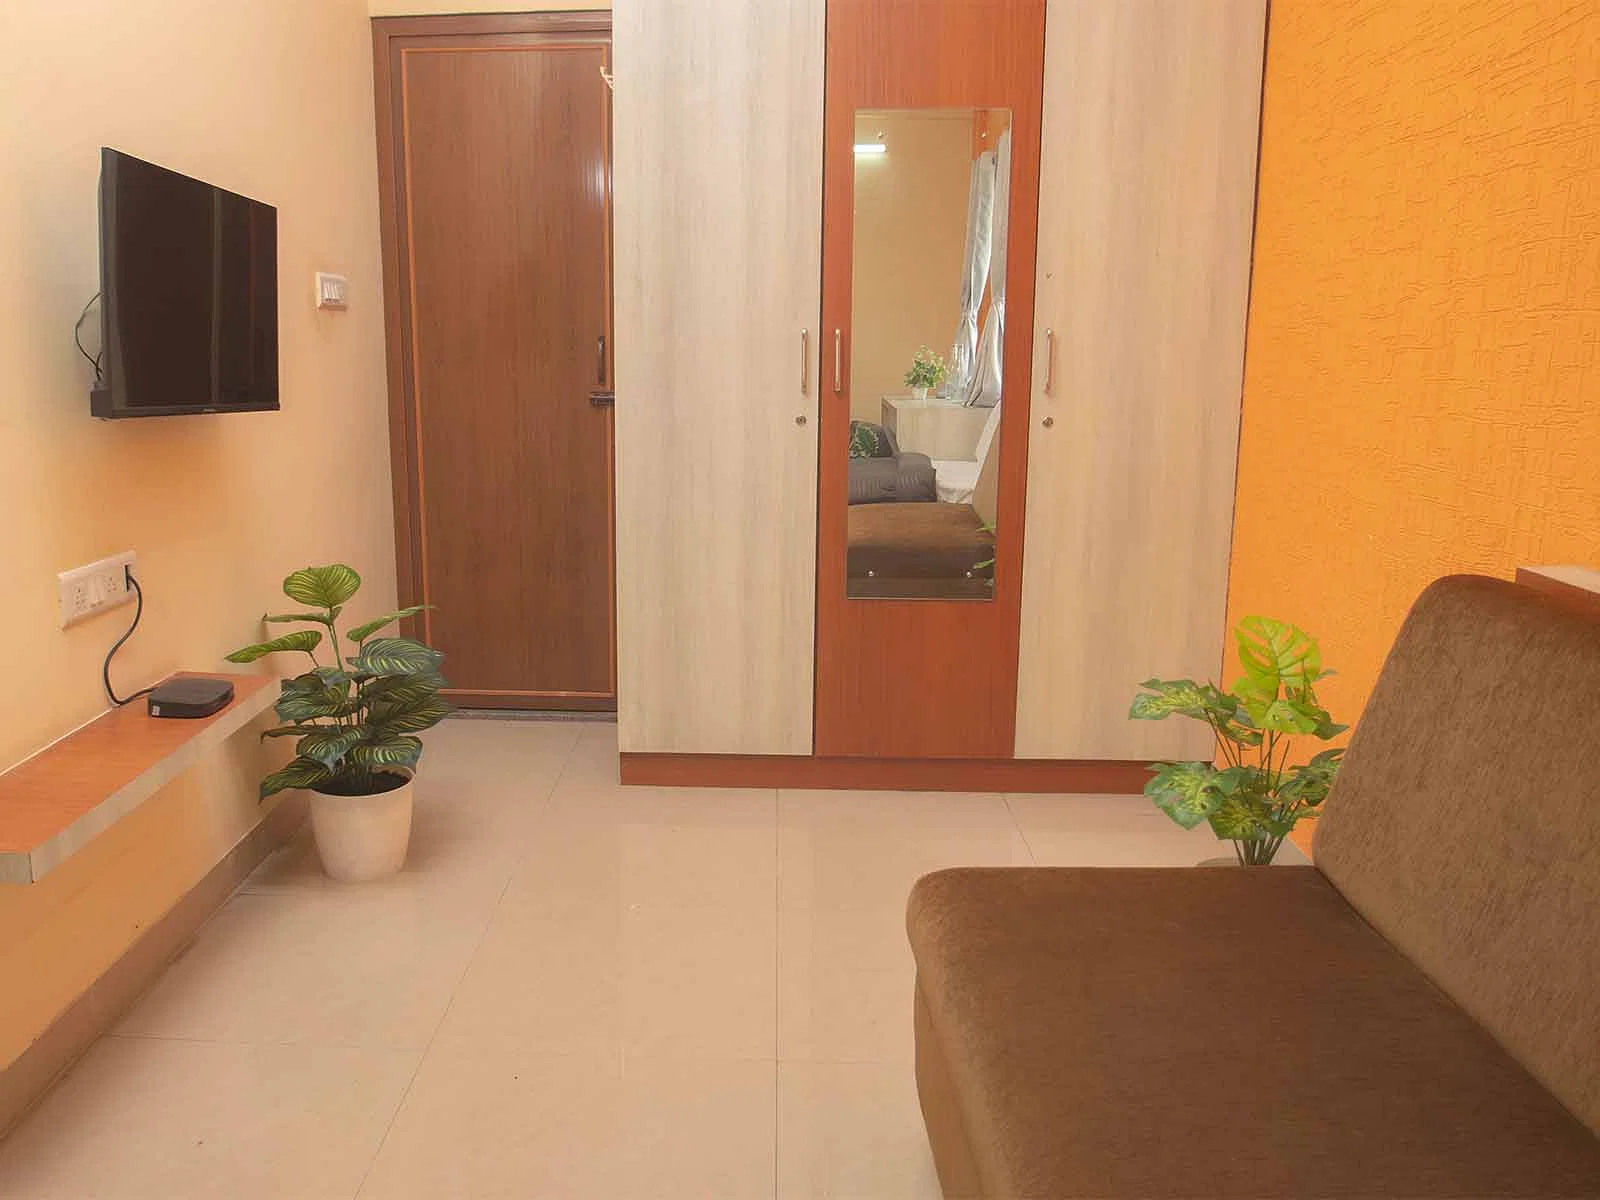 luxury pg rooms for working professionals couple with private bathrooms in Bangalore-Zolo Heaven C